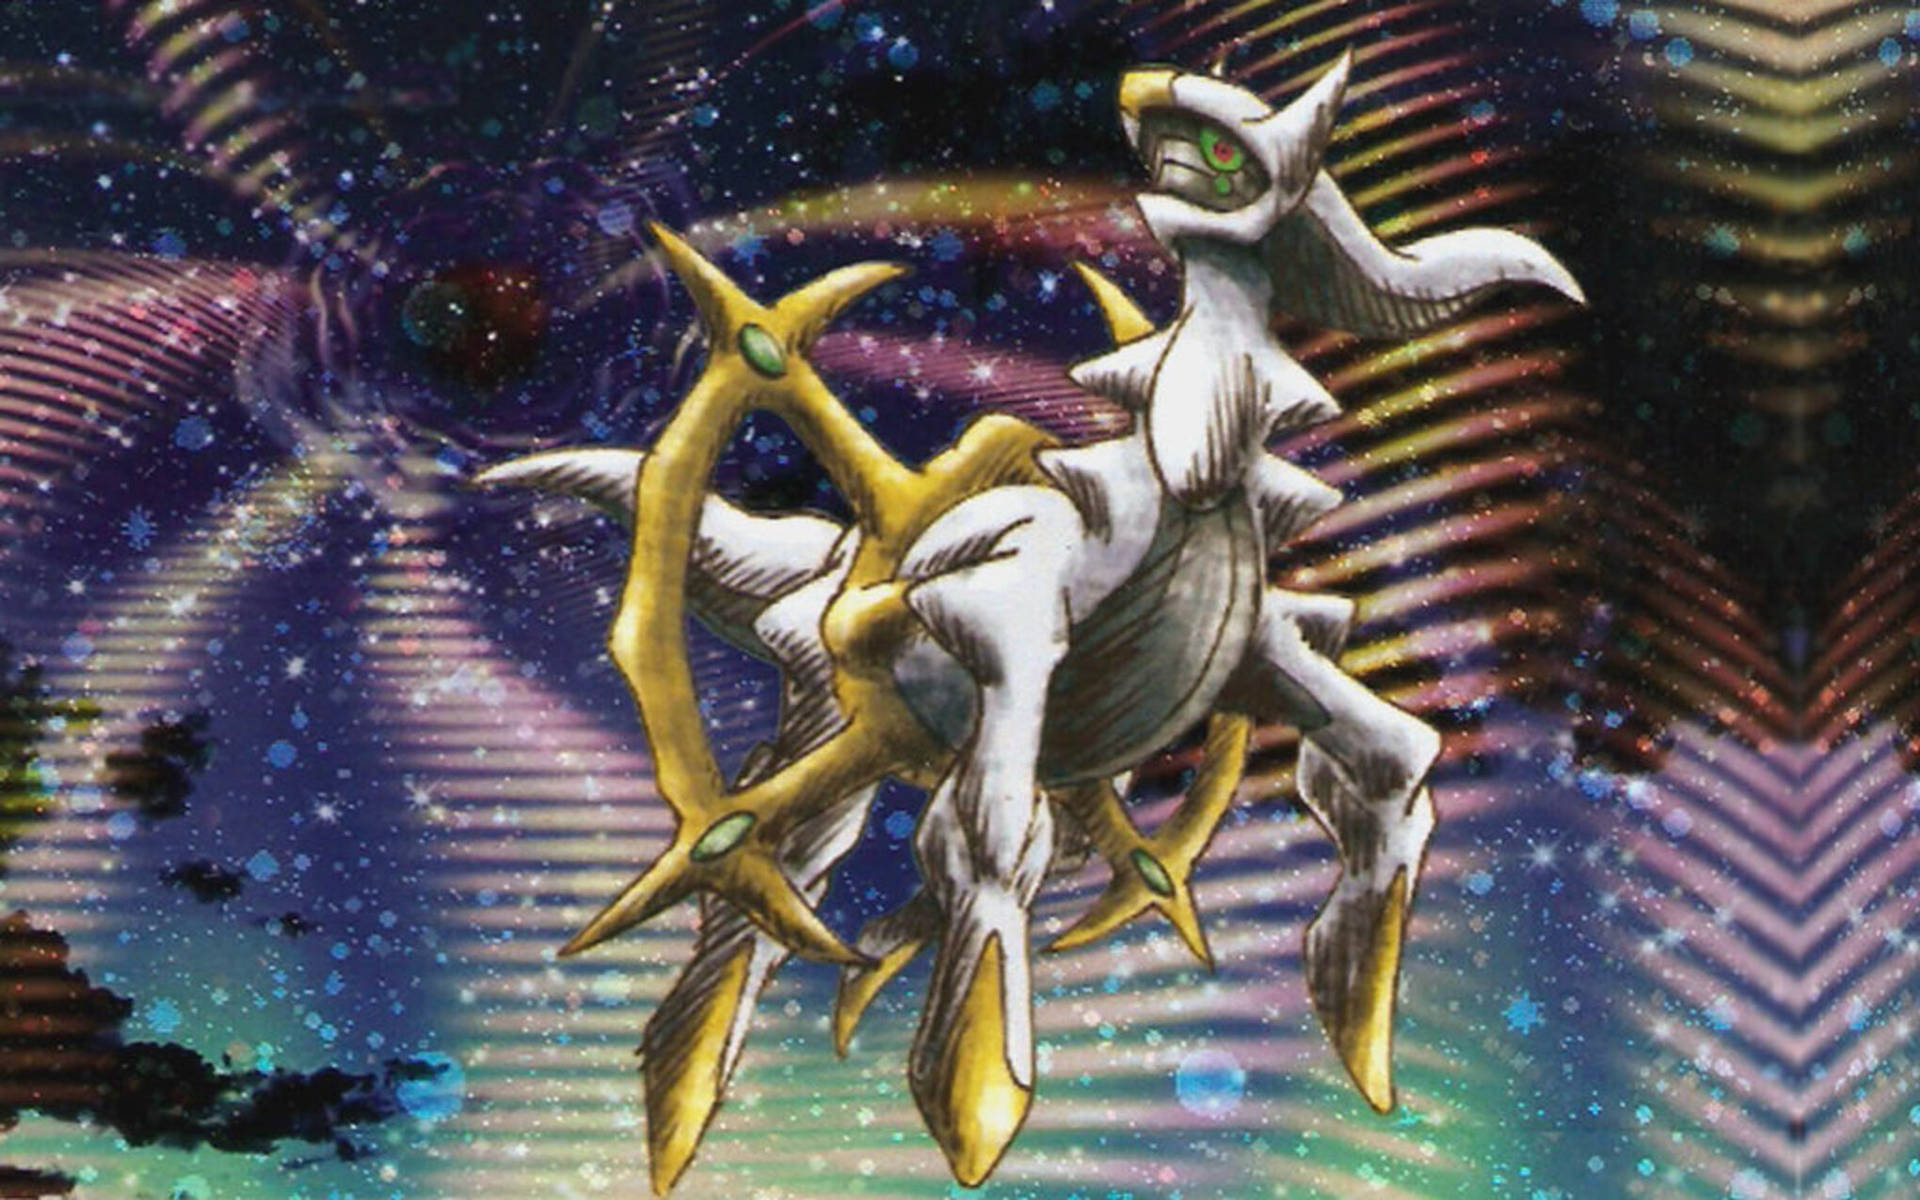 Catch A Glimpse Of The Mysterious Arceus. Background